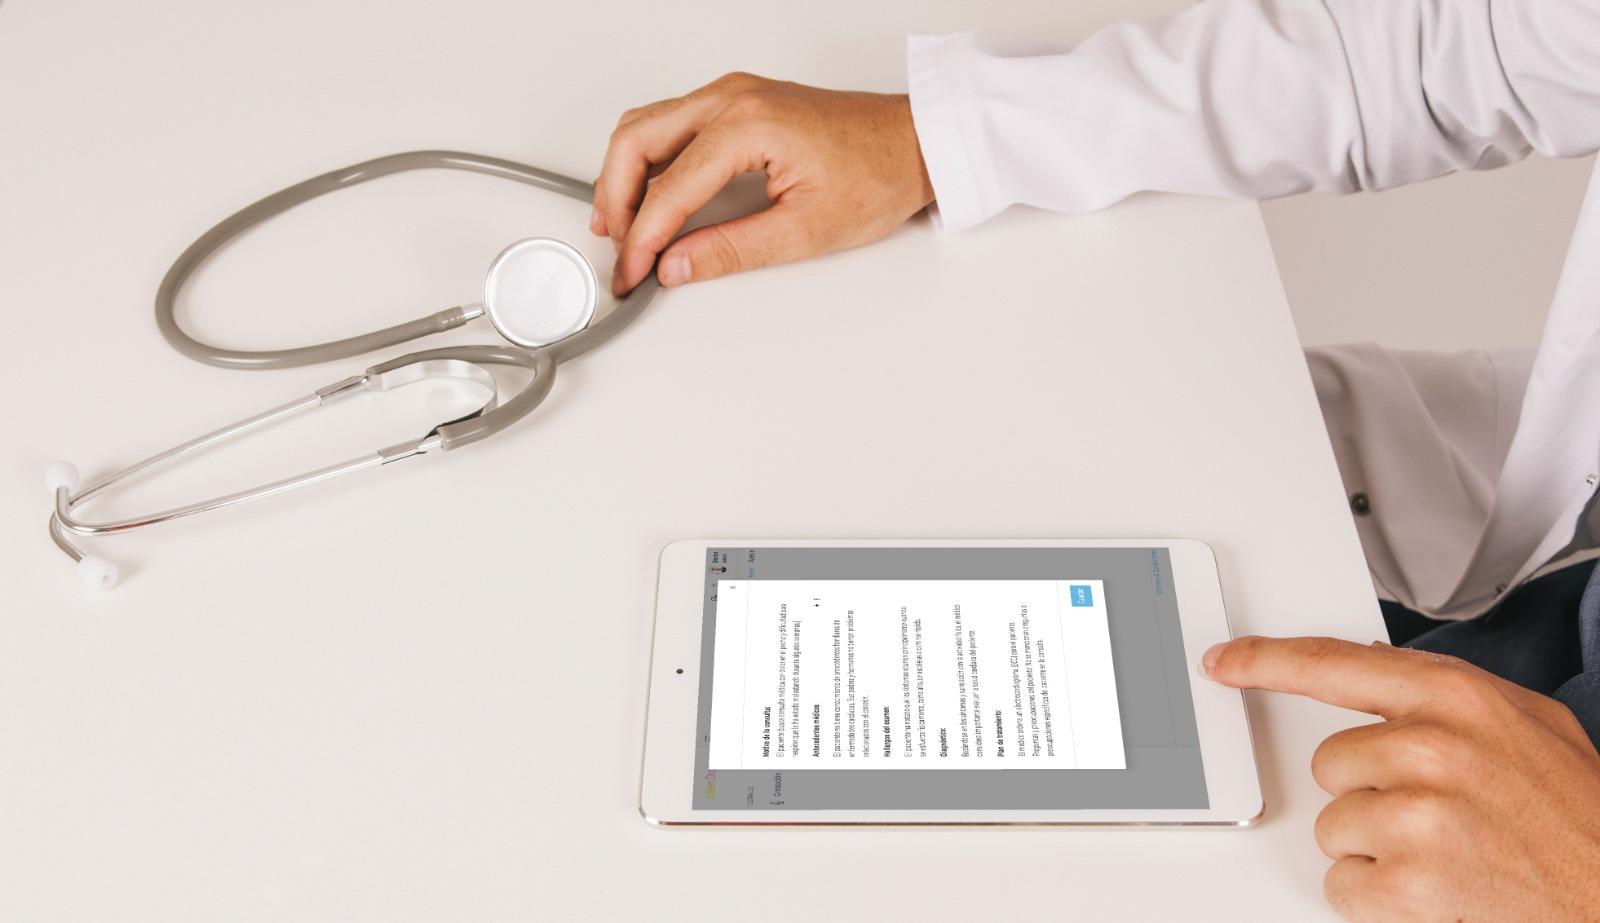 A doctor using a tablet

Description automatically generated